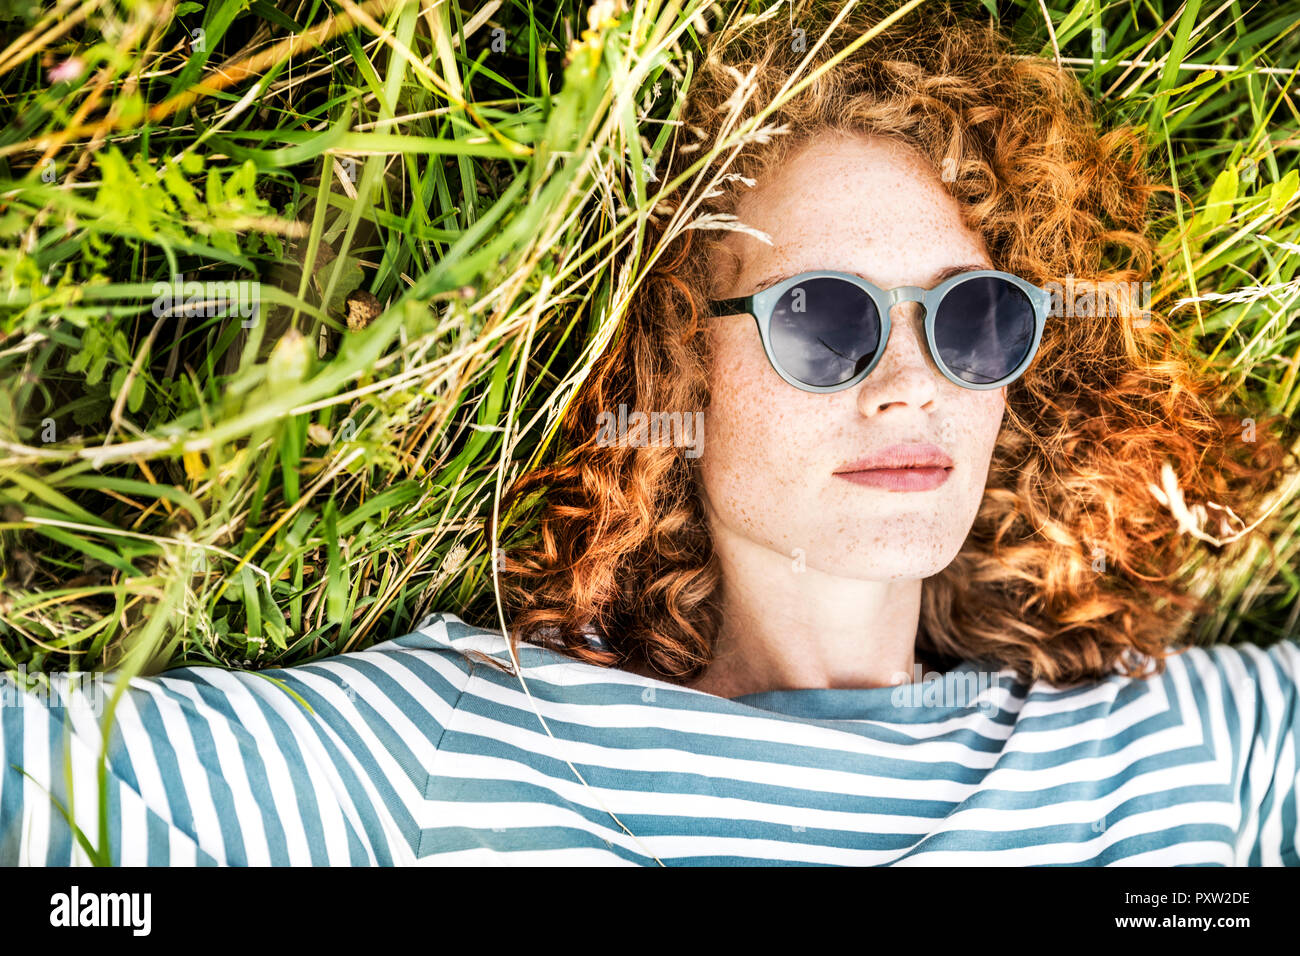 Portrait of young woman relaxing on a meadow wearing sunglasses Stock Photo